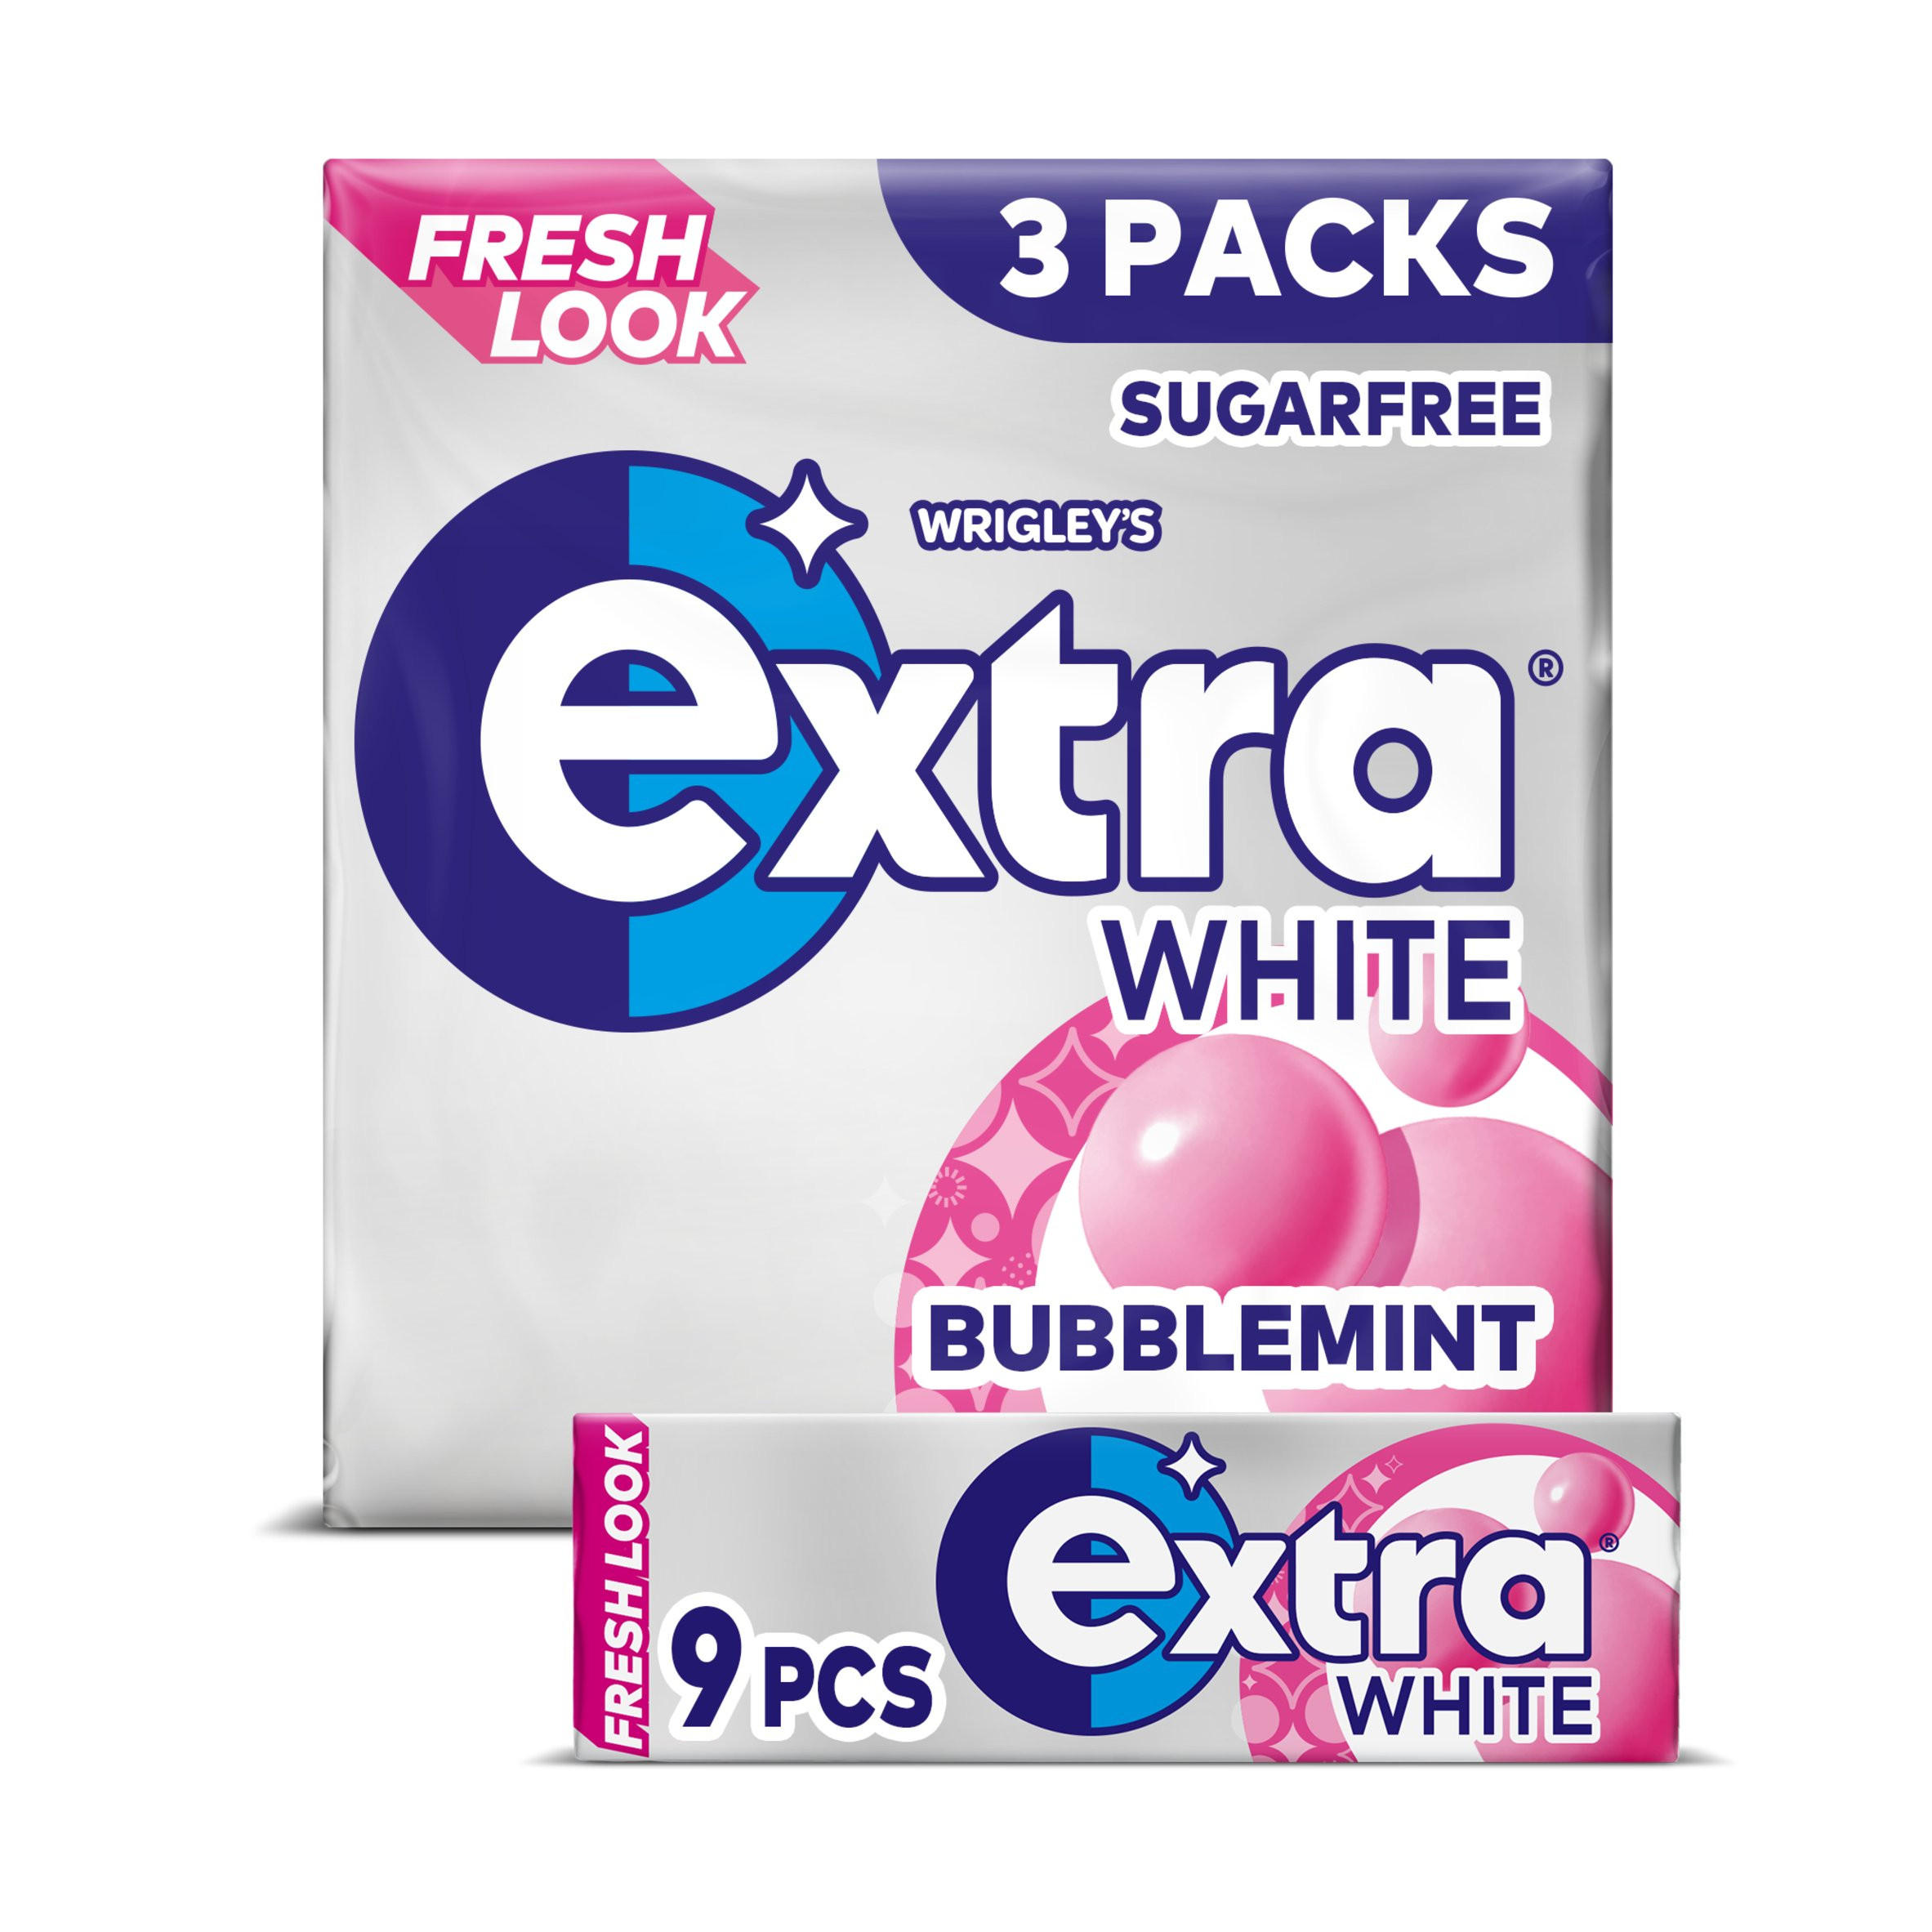 extra-white-bubblemint-chewing-gum-sugar-free-multipack-3-x-9-pieces-chewing-gum-mints